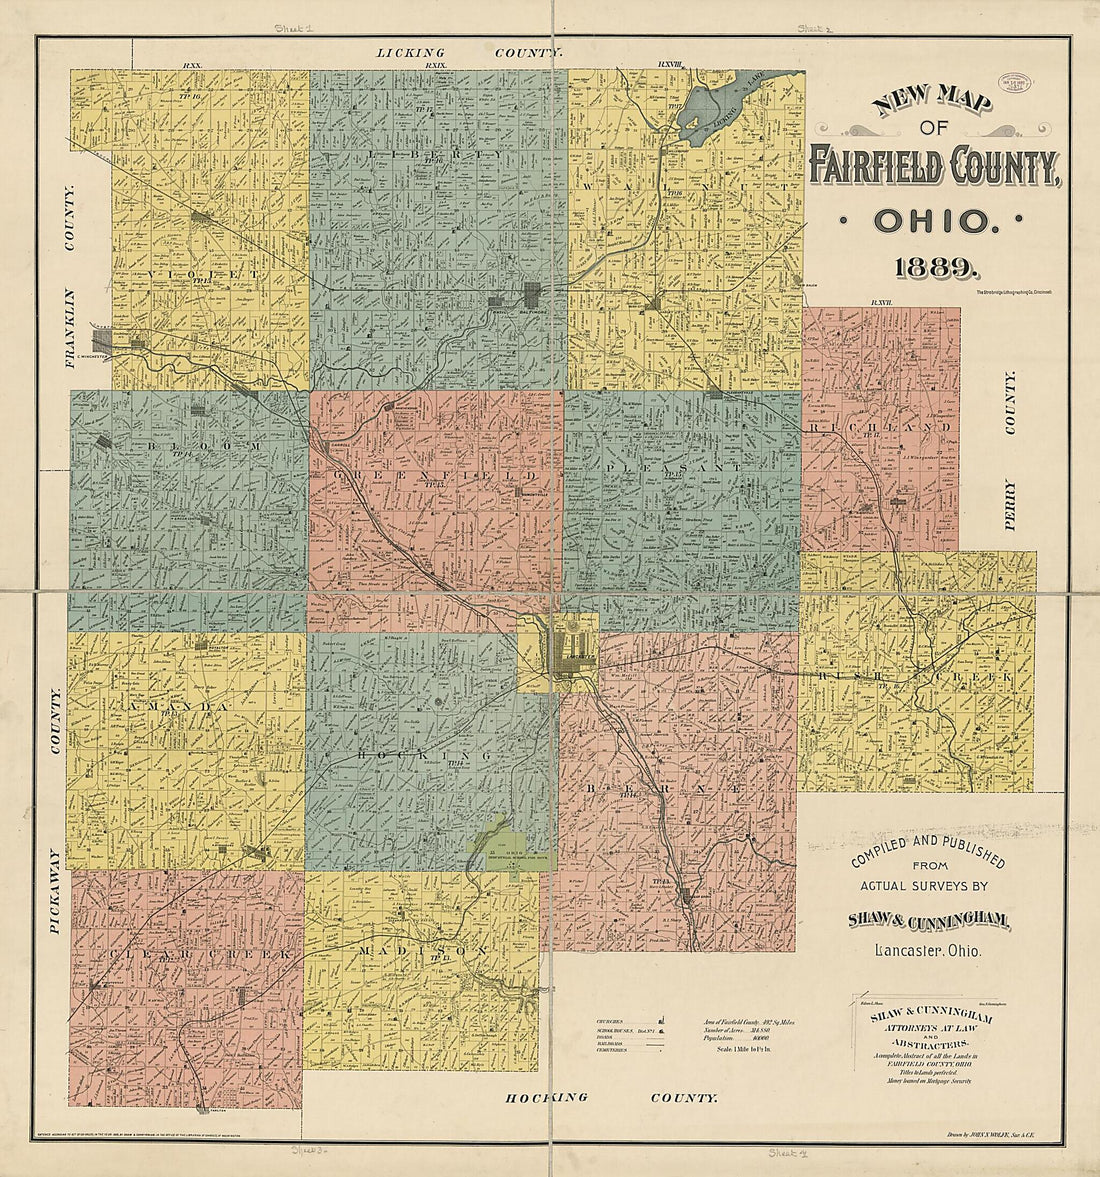 This old map of New Map of Fairfield County, Ohio from 1889 was created by  Shaw &amp; Cunningham,  Strobridge Lithographing Co, John N. Wolfe in 1889